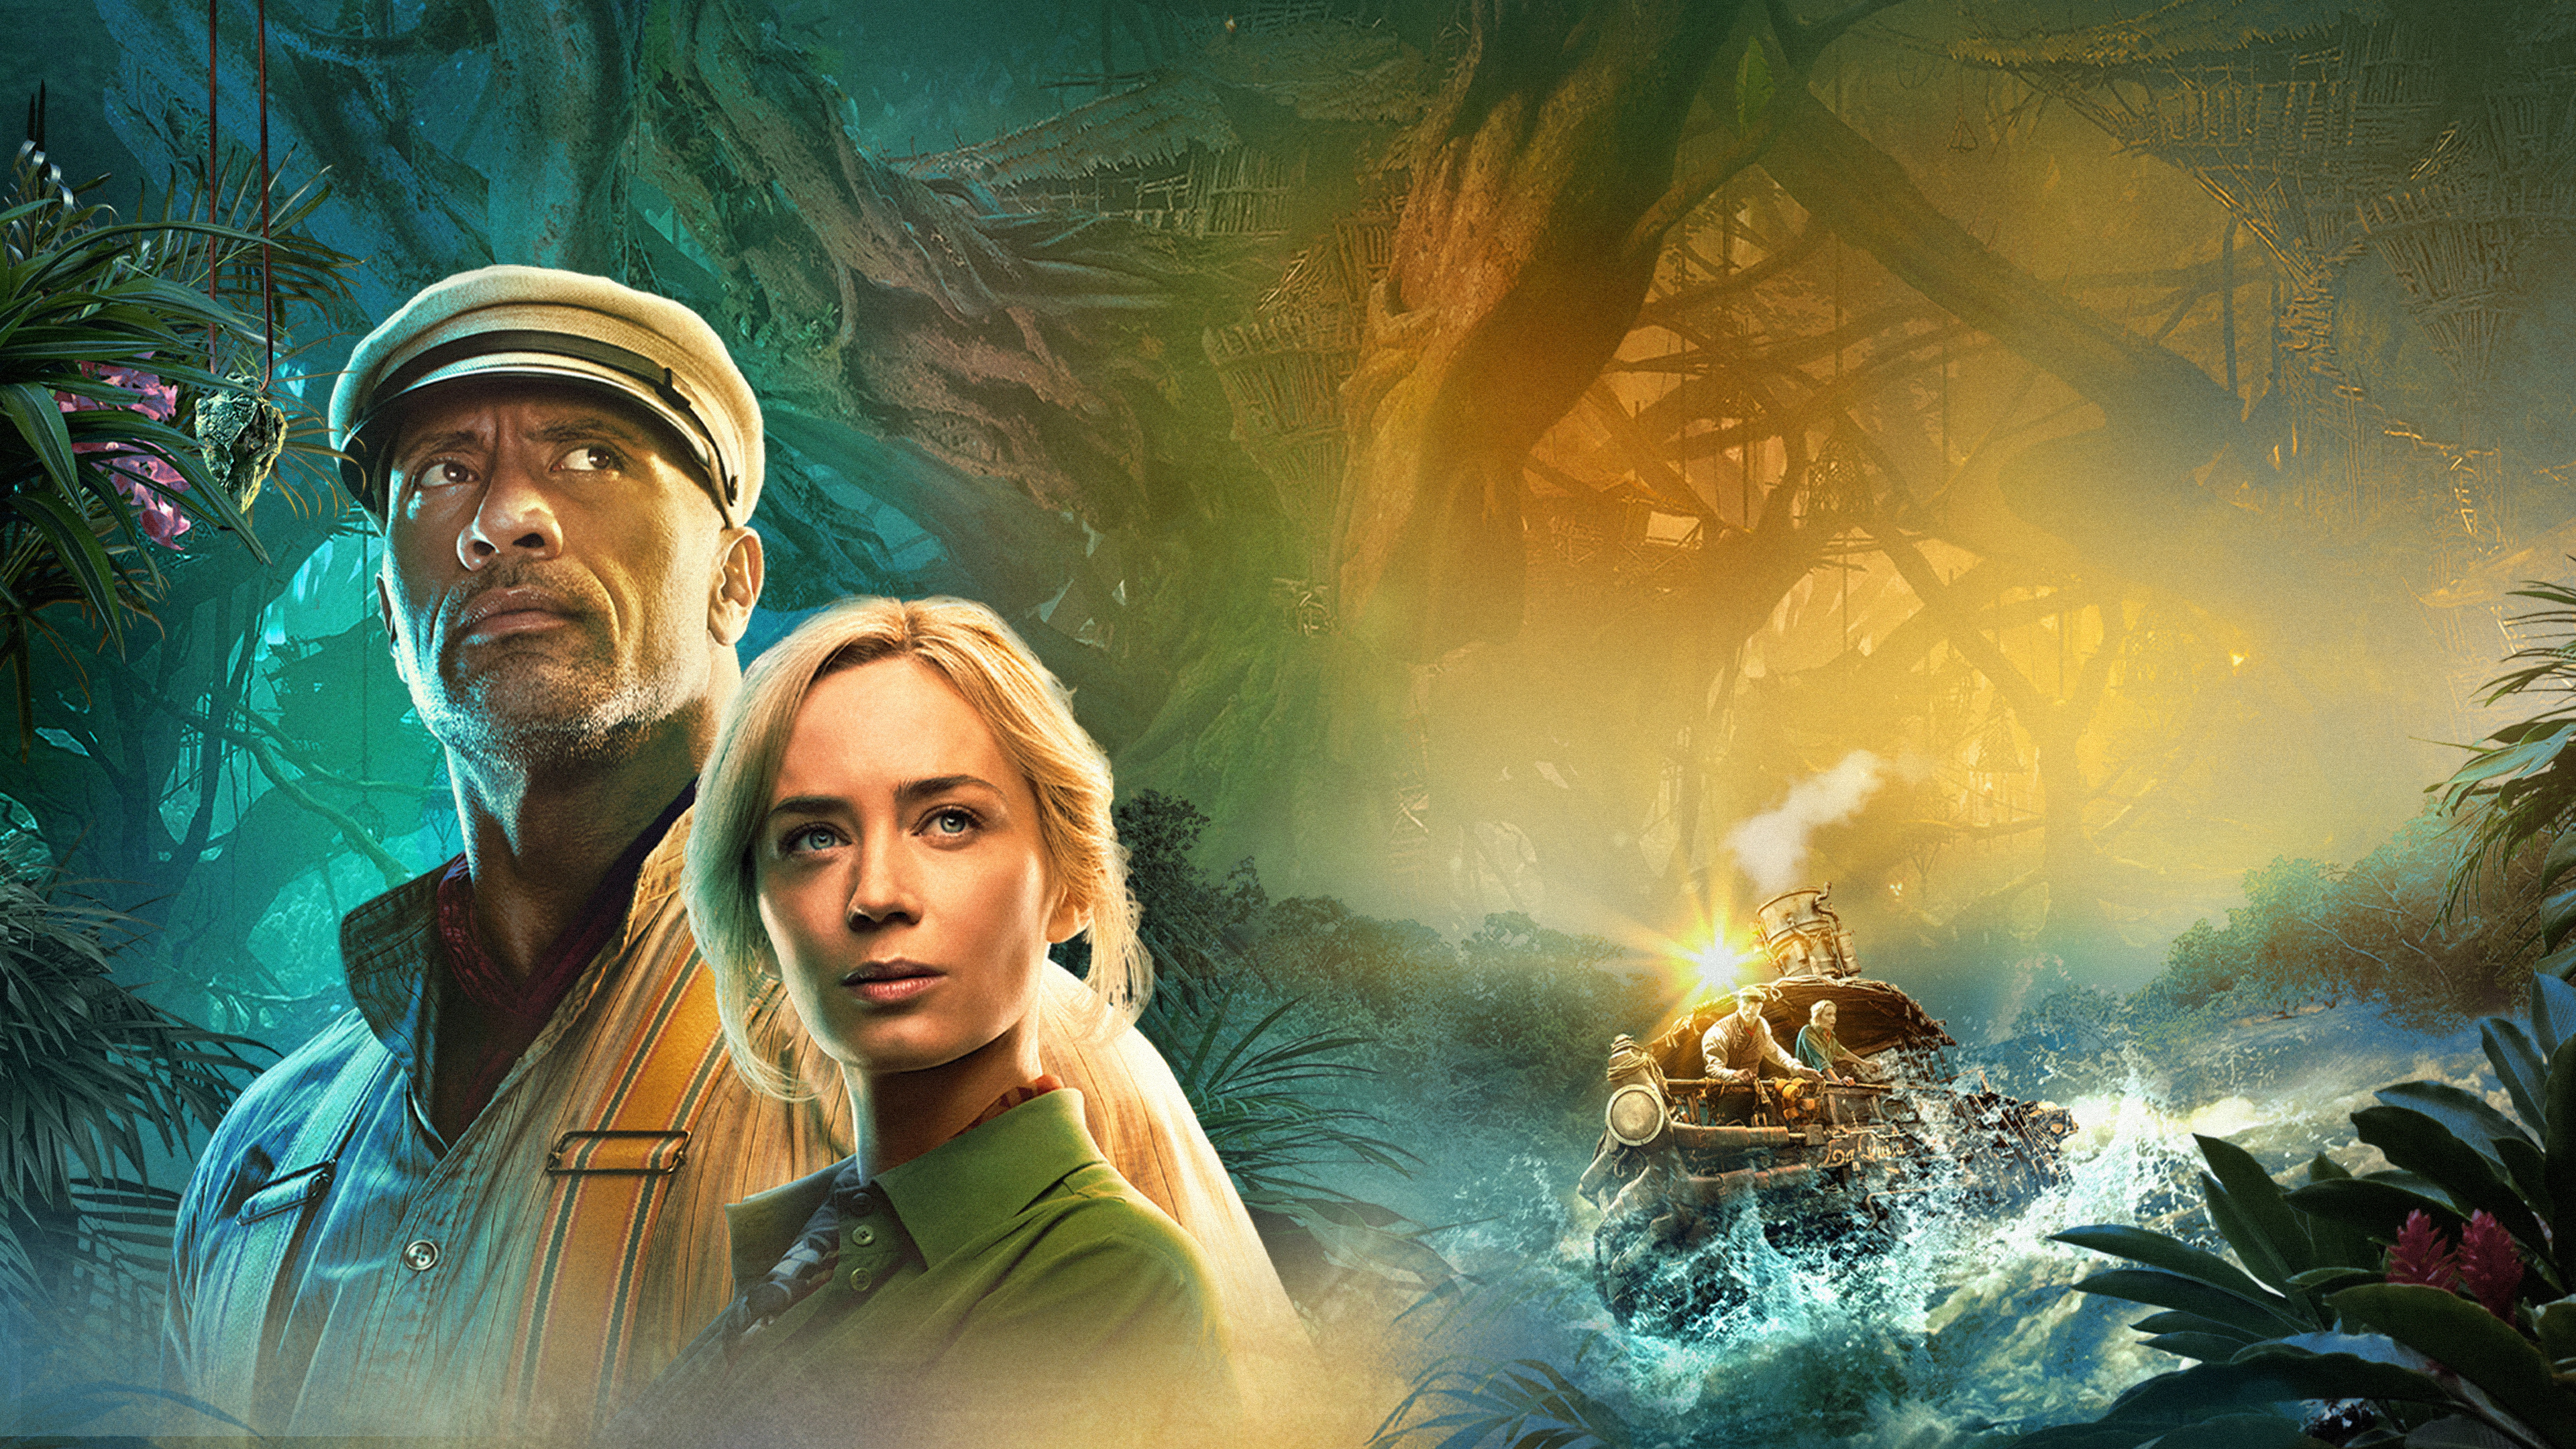 Emily Blunt: Played Dr. Lily Houghton, an eccentric and virtuous botanist, in Jungle Cruise (2021). 3840x2160 4K Wallpaper.